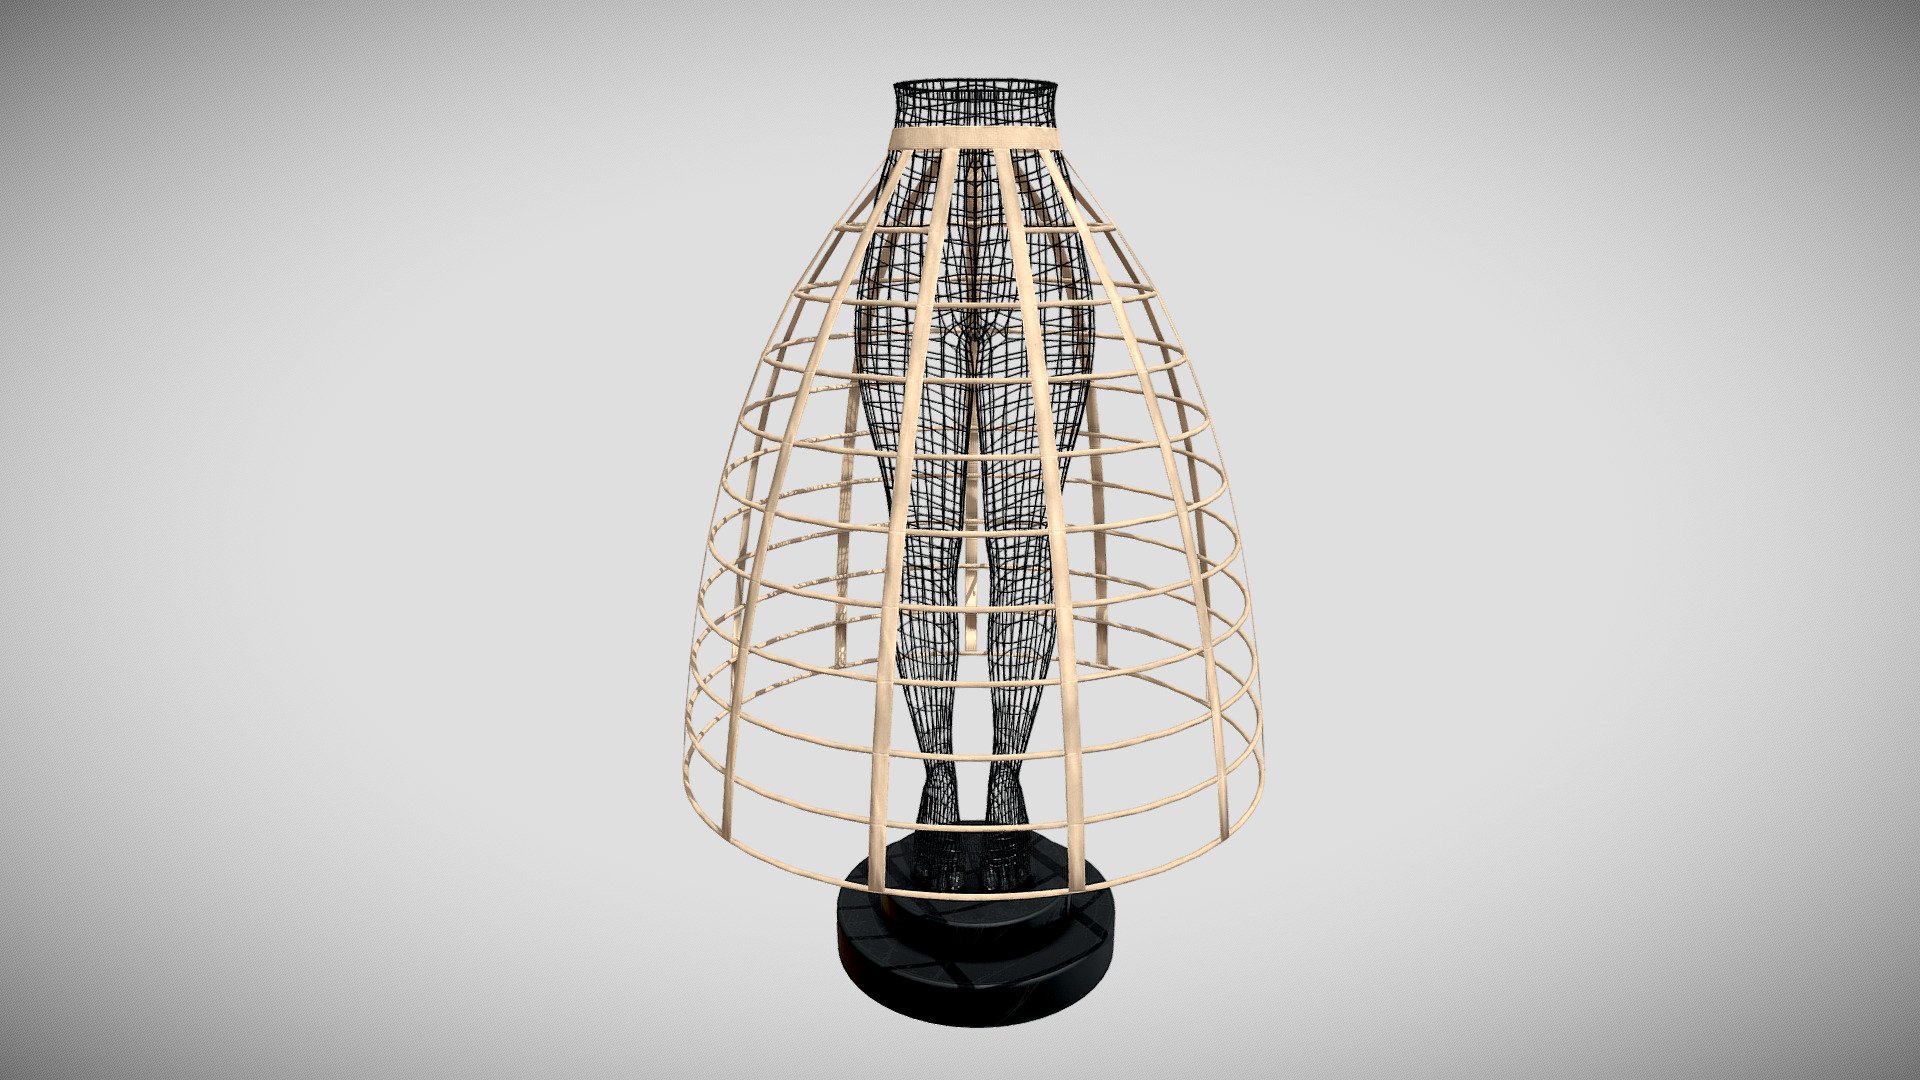 The 3D model presents a digital reconstruction of a historical crinoline - a special framework used to expand the fullness of the skirt in the mid 19th century. The crinoline is presented in a historical patent (U.S. Patent № 22875). It has 10 hoops and 11 ribbons. A new method of parameterisation was applied to reproduce the shape and construction of the hoops, ribbons and belt (for further details see https://doi.org/10.1080/00405000.2019.1621042). The authors of the 3D model are

Aleksei Moskvin https://independent.academia.edu/AlekseiMoskvin

Mariia Moskvina https://independent.academia.edu/MariiaMoskvina

(Saint Petersburg State University of Industrial Technologies and Design)

DOI: http://dx.doi.org/10.13140/RG.2.2.25155.12320

The authors thank Prof. Victor Kuzmichev from Ivanovo State Polytechnic University for his important contribution to this reconstruction 3d model